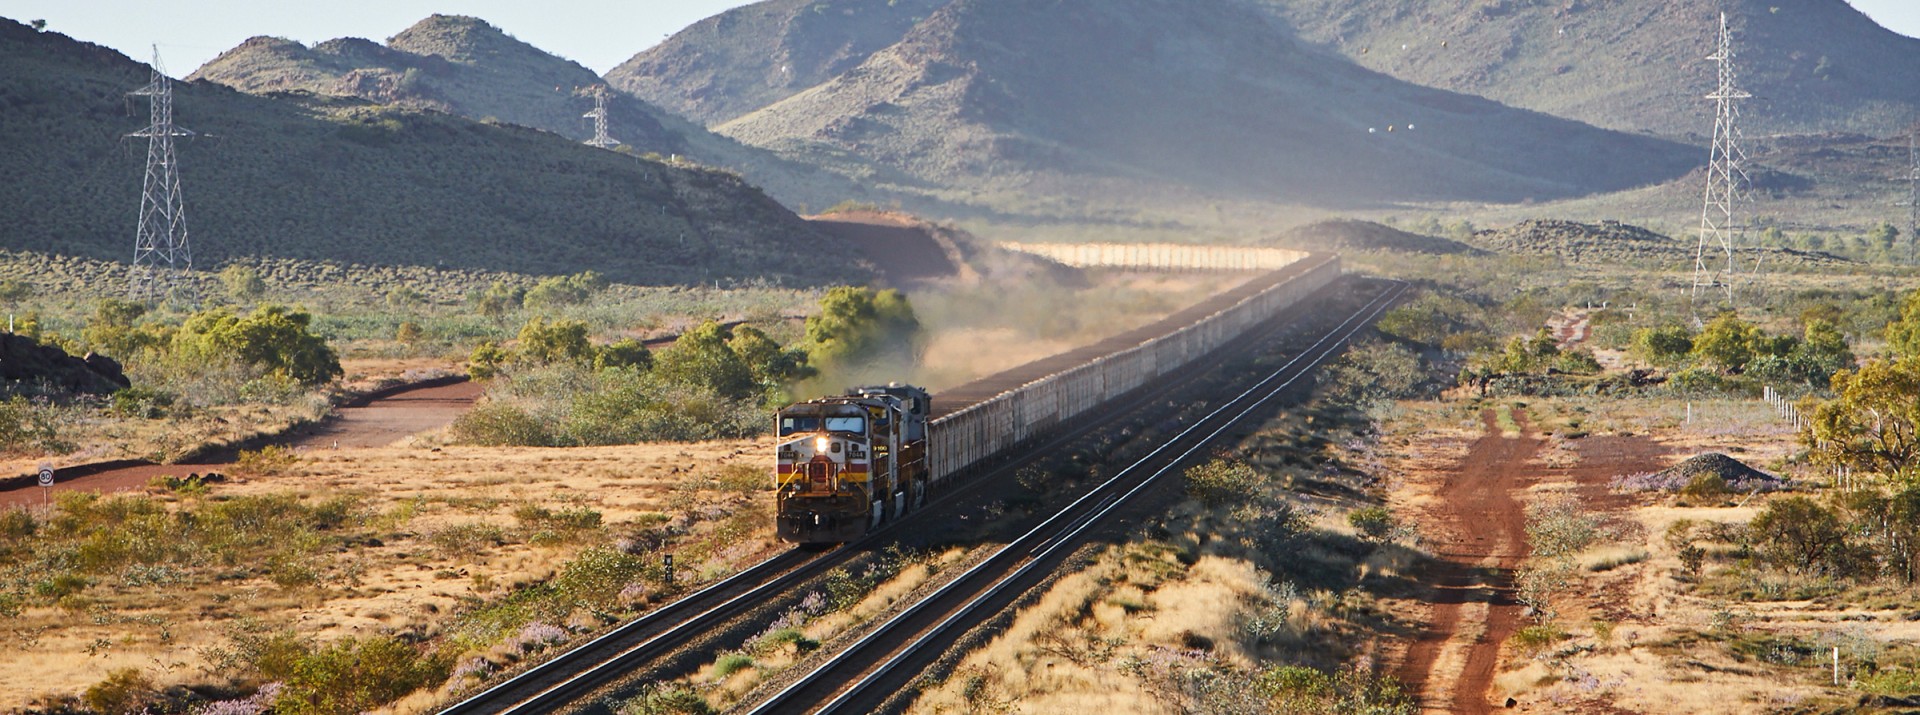 A 2.4 km long heavy freight train loaded with iron ore travels through a barren mountain landscape in Australia.